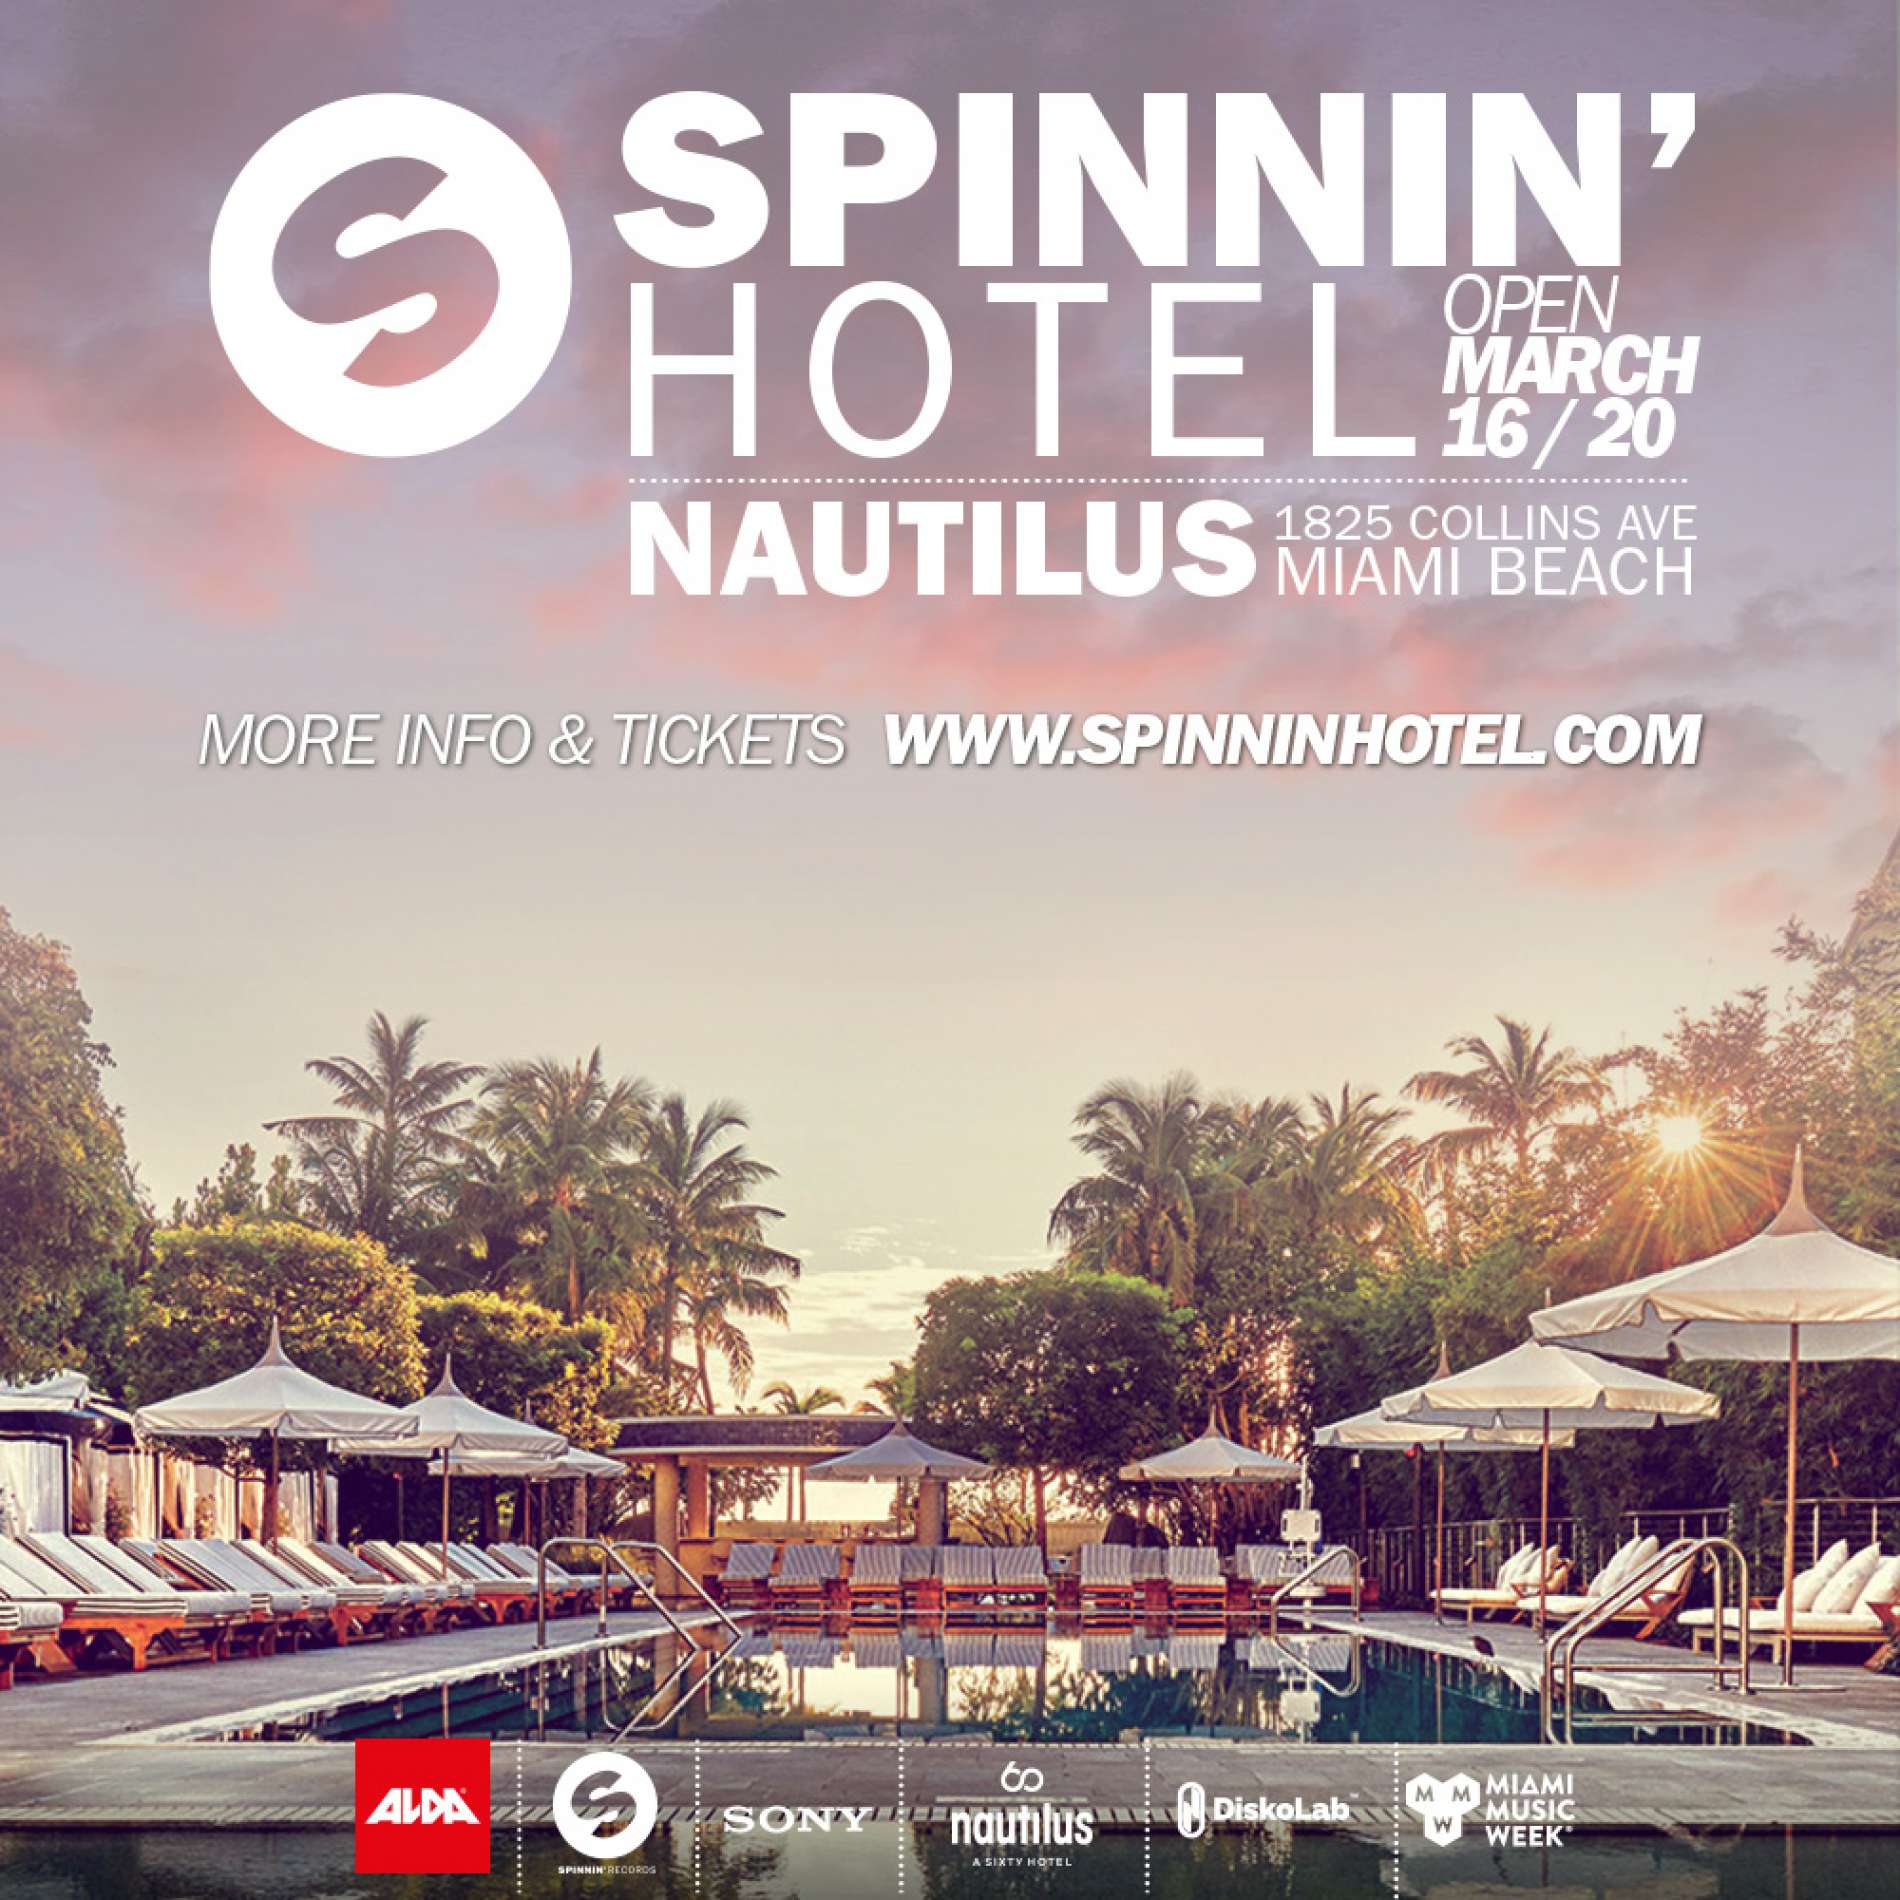 Win tickets to Spinnin's Miami events!